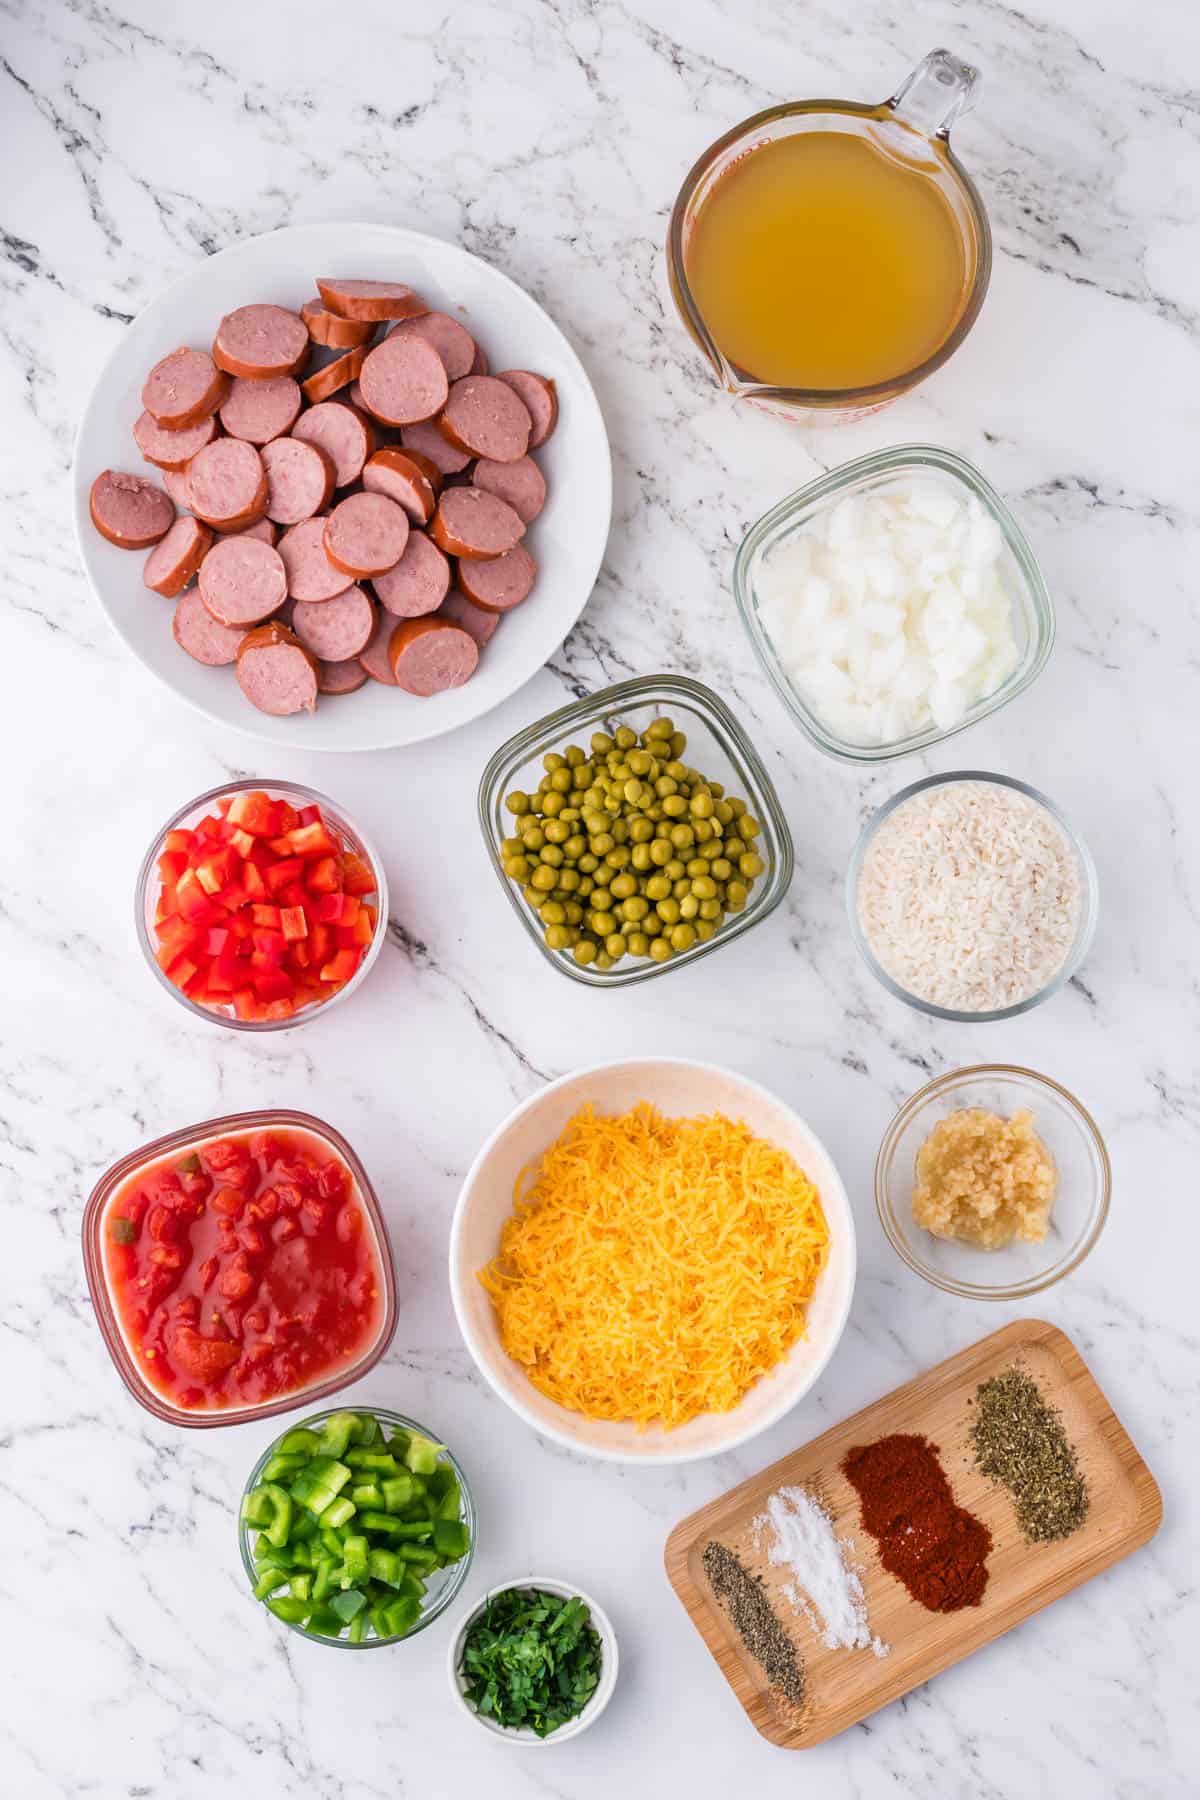 Ingredients for sausage and rice casserole.